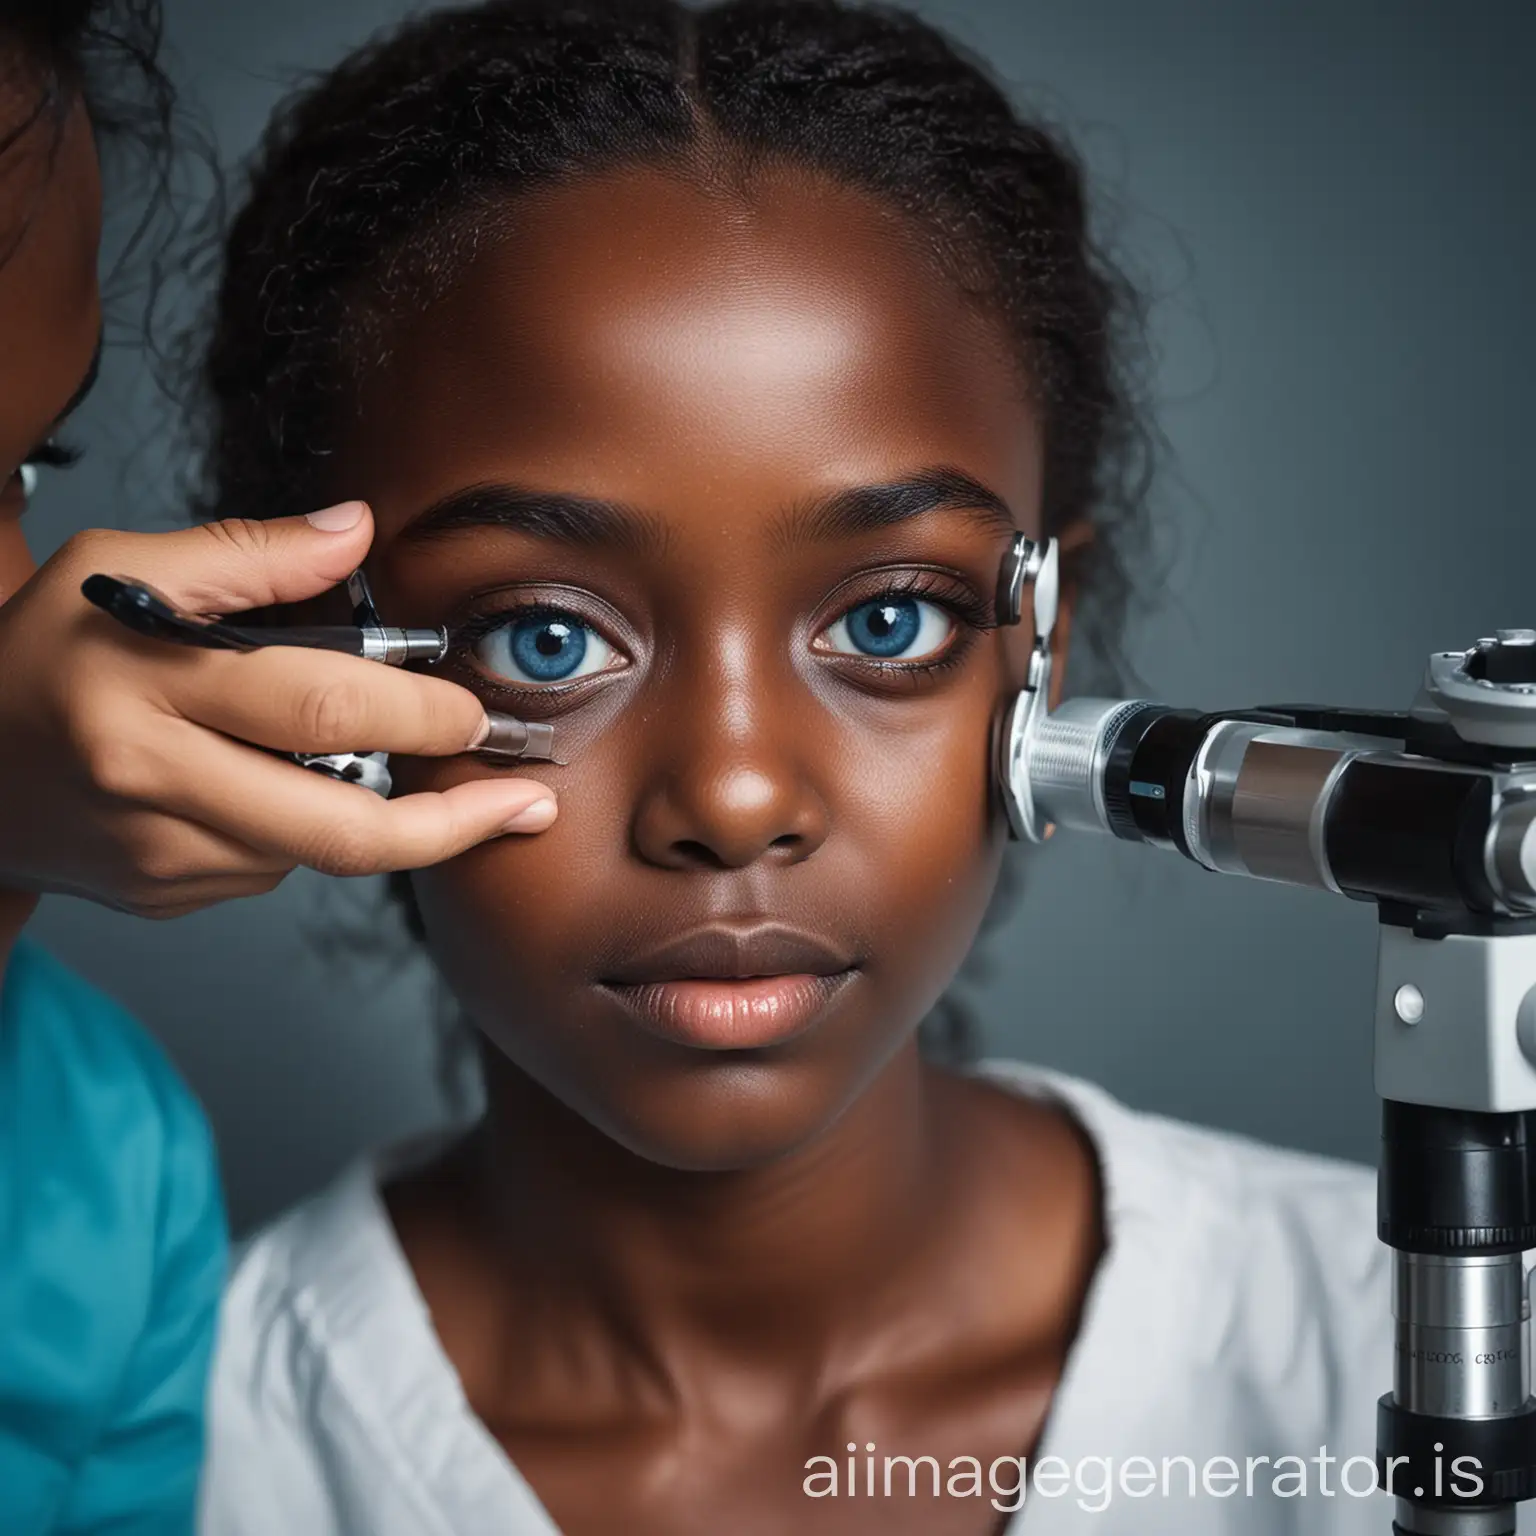 Young-Black-Village-Girl-with-Cataract-Examined-by-Doctor